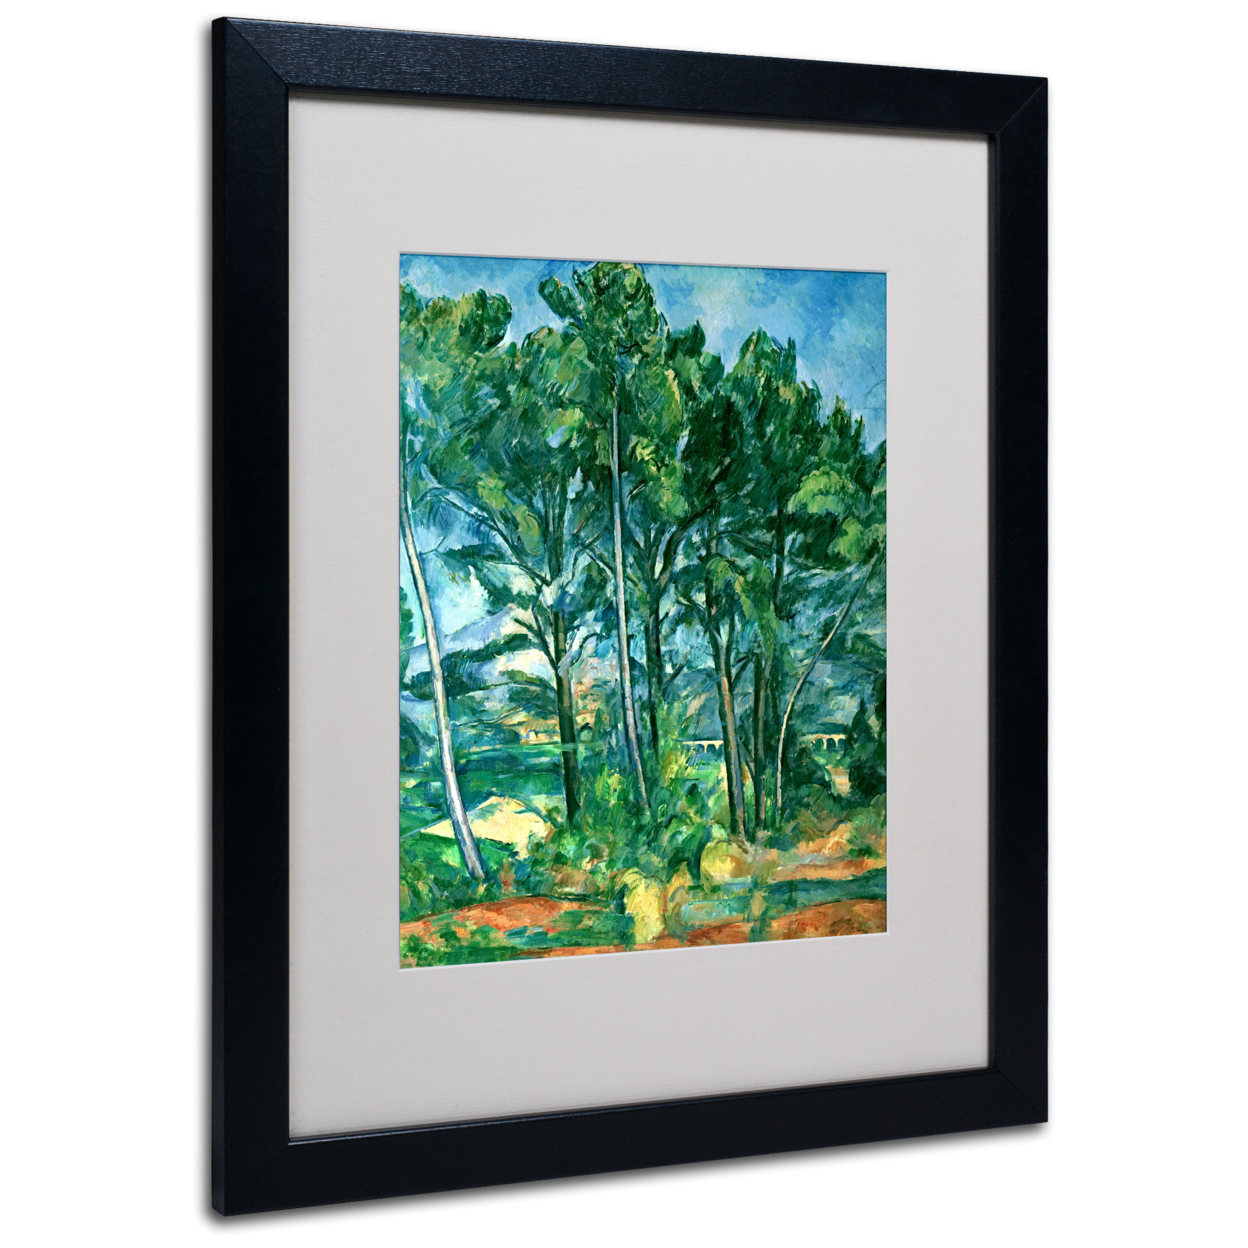 Paul Cezanne 'The Aqueduct' Black Wooden Framed Art 18 X 22 Inches